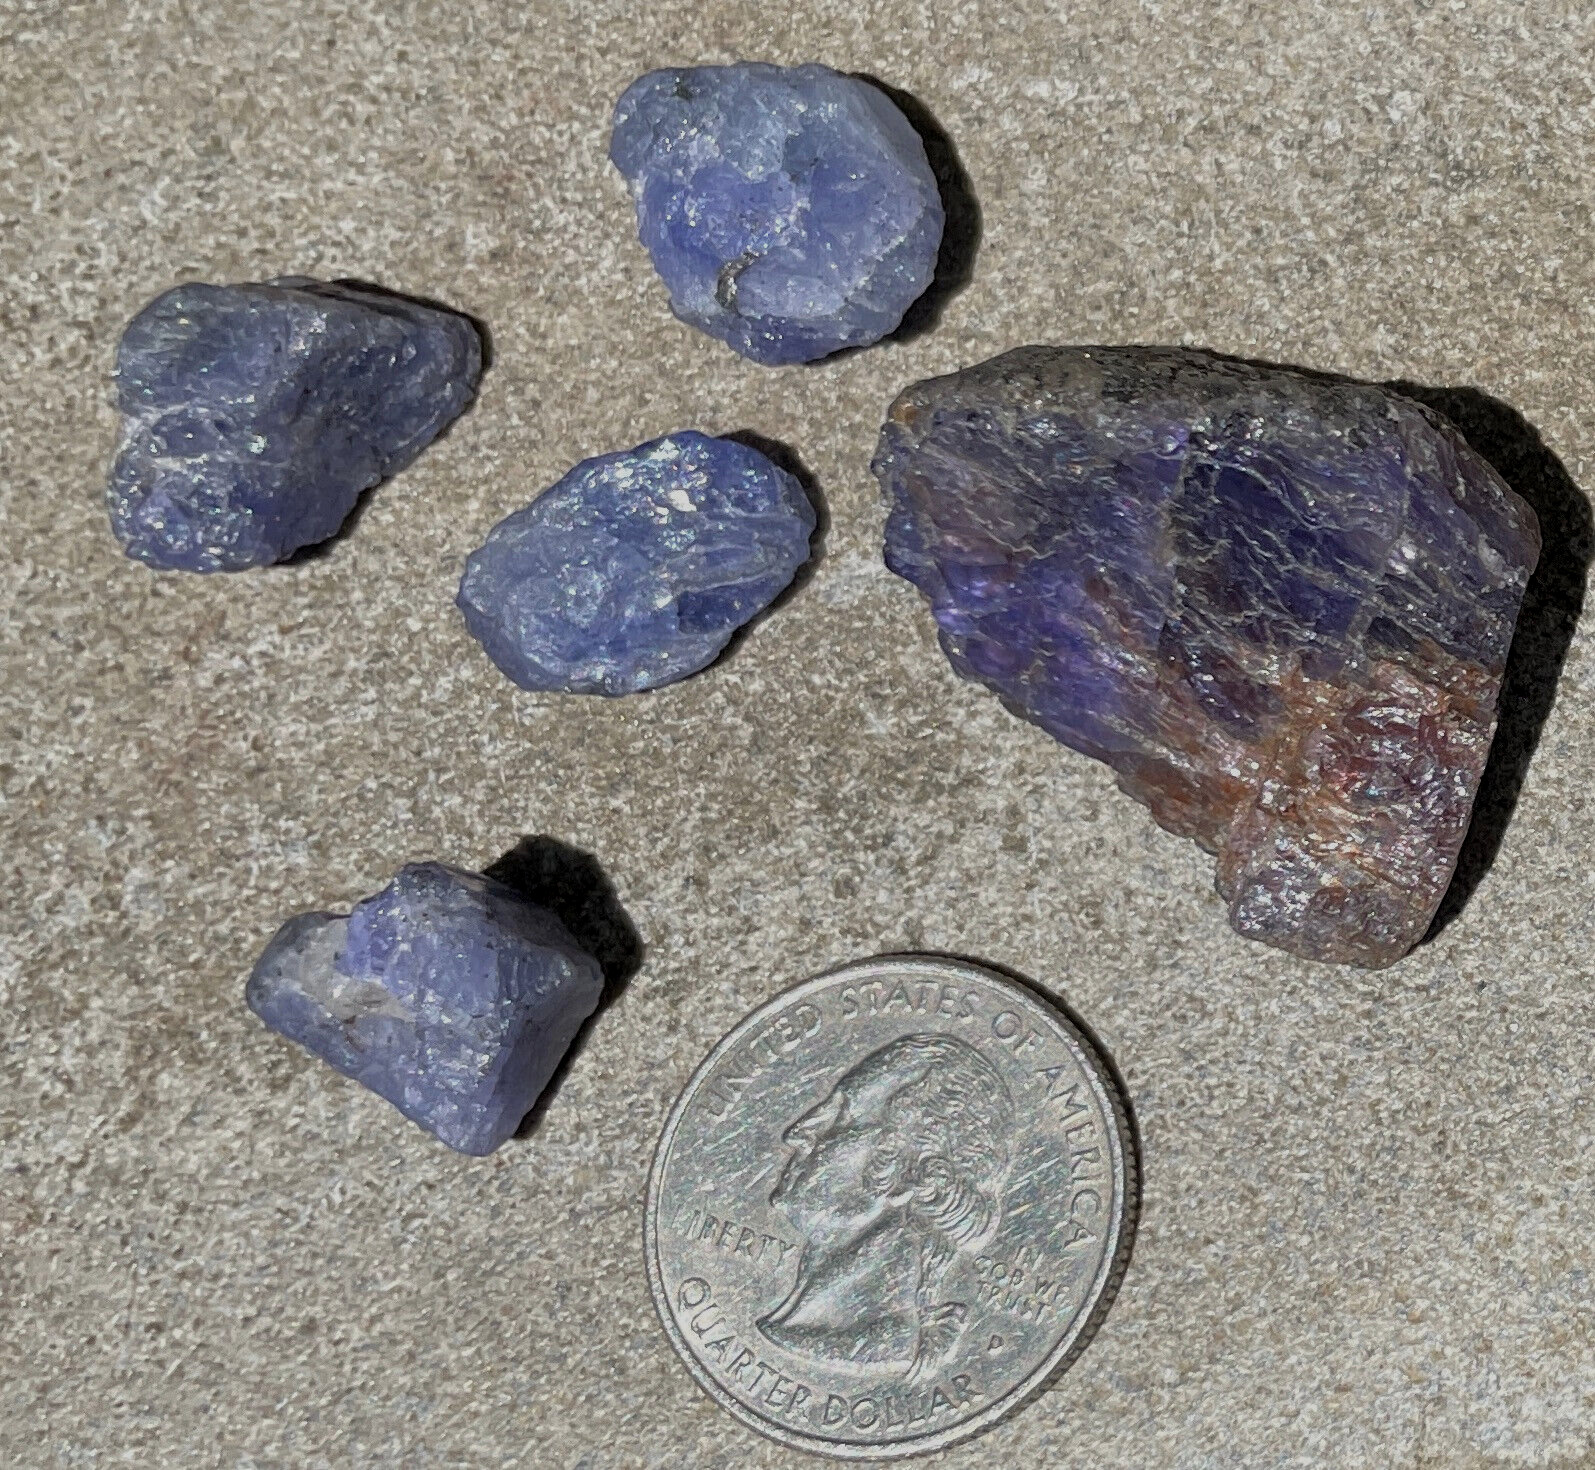 USA SALE *SEE VIDEO 35g LOT AUTHENTIC REAL TANZANITE SPECIMENS FANTASTIC LARGE/S